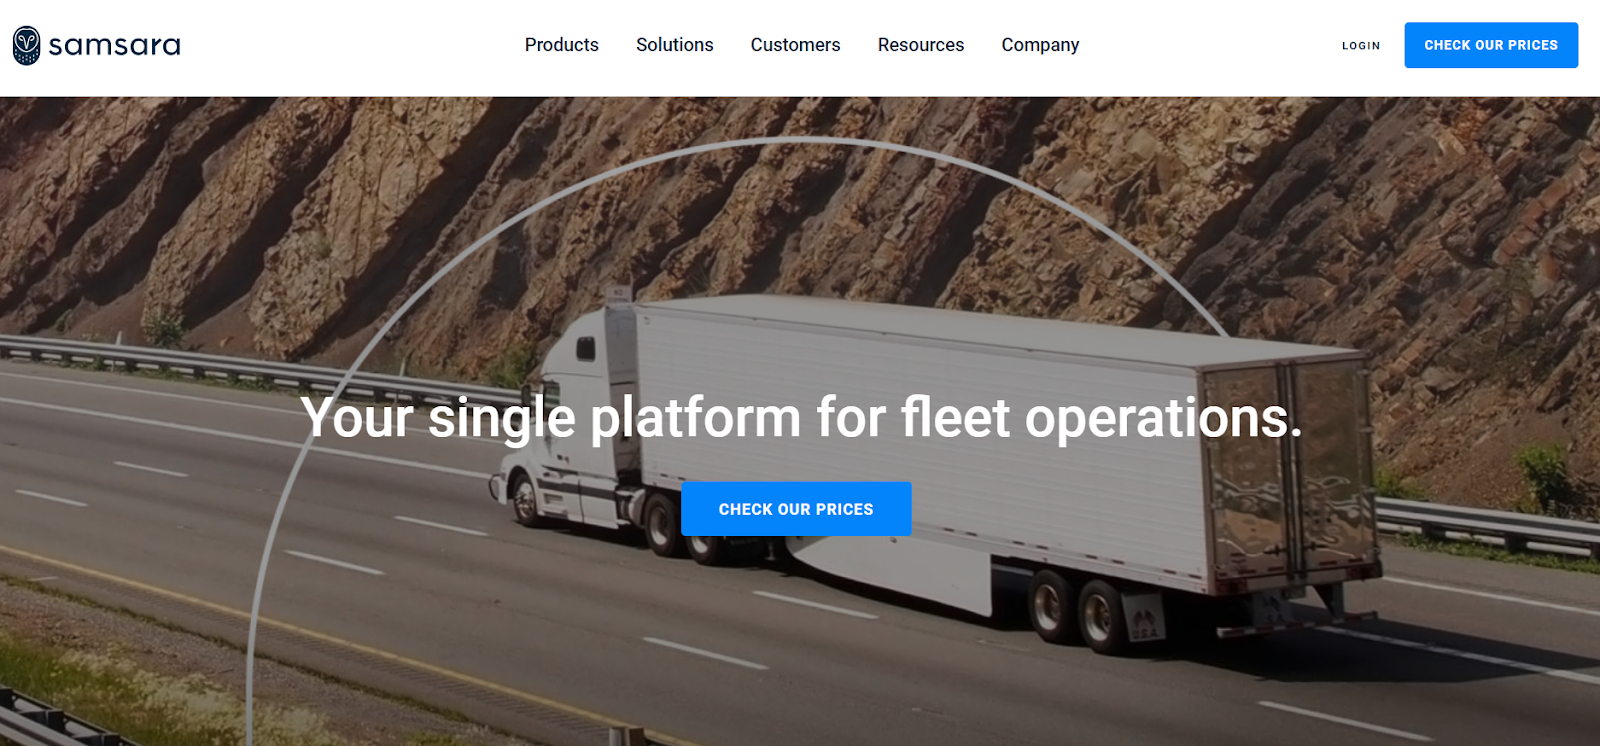 Best fleet management software tools for reducing fleet downtime. downtime fleet management, vehicle downtime, fleet downtime, downtime fleet, minimize driver downtime
